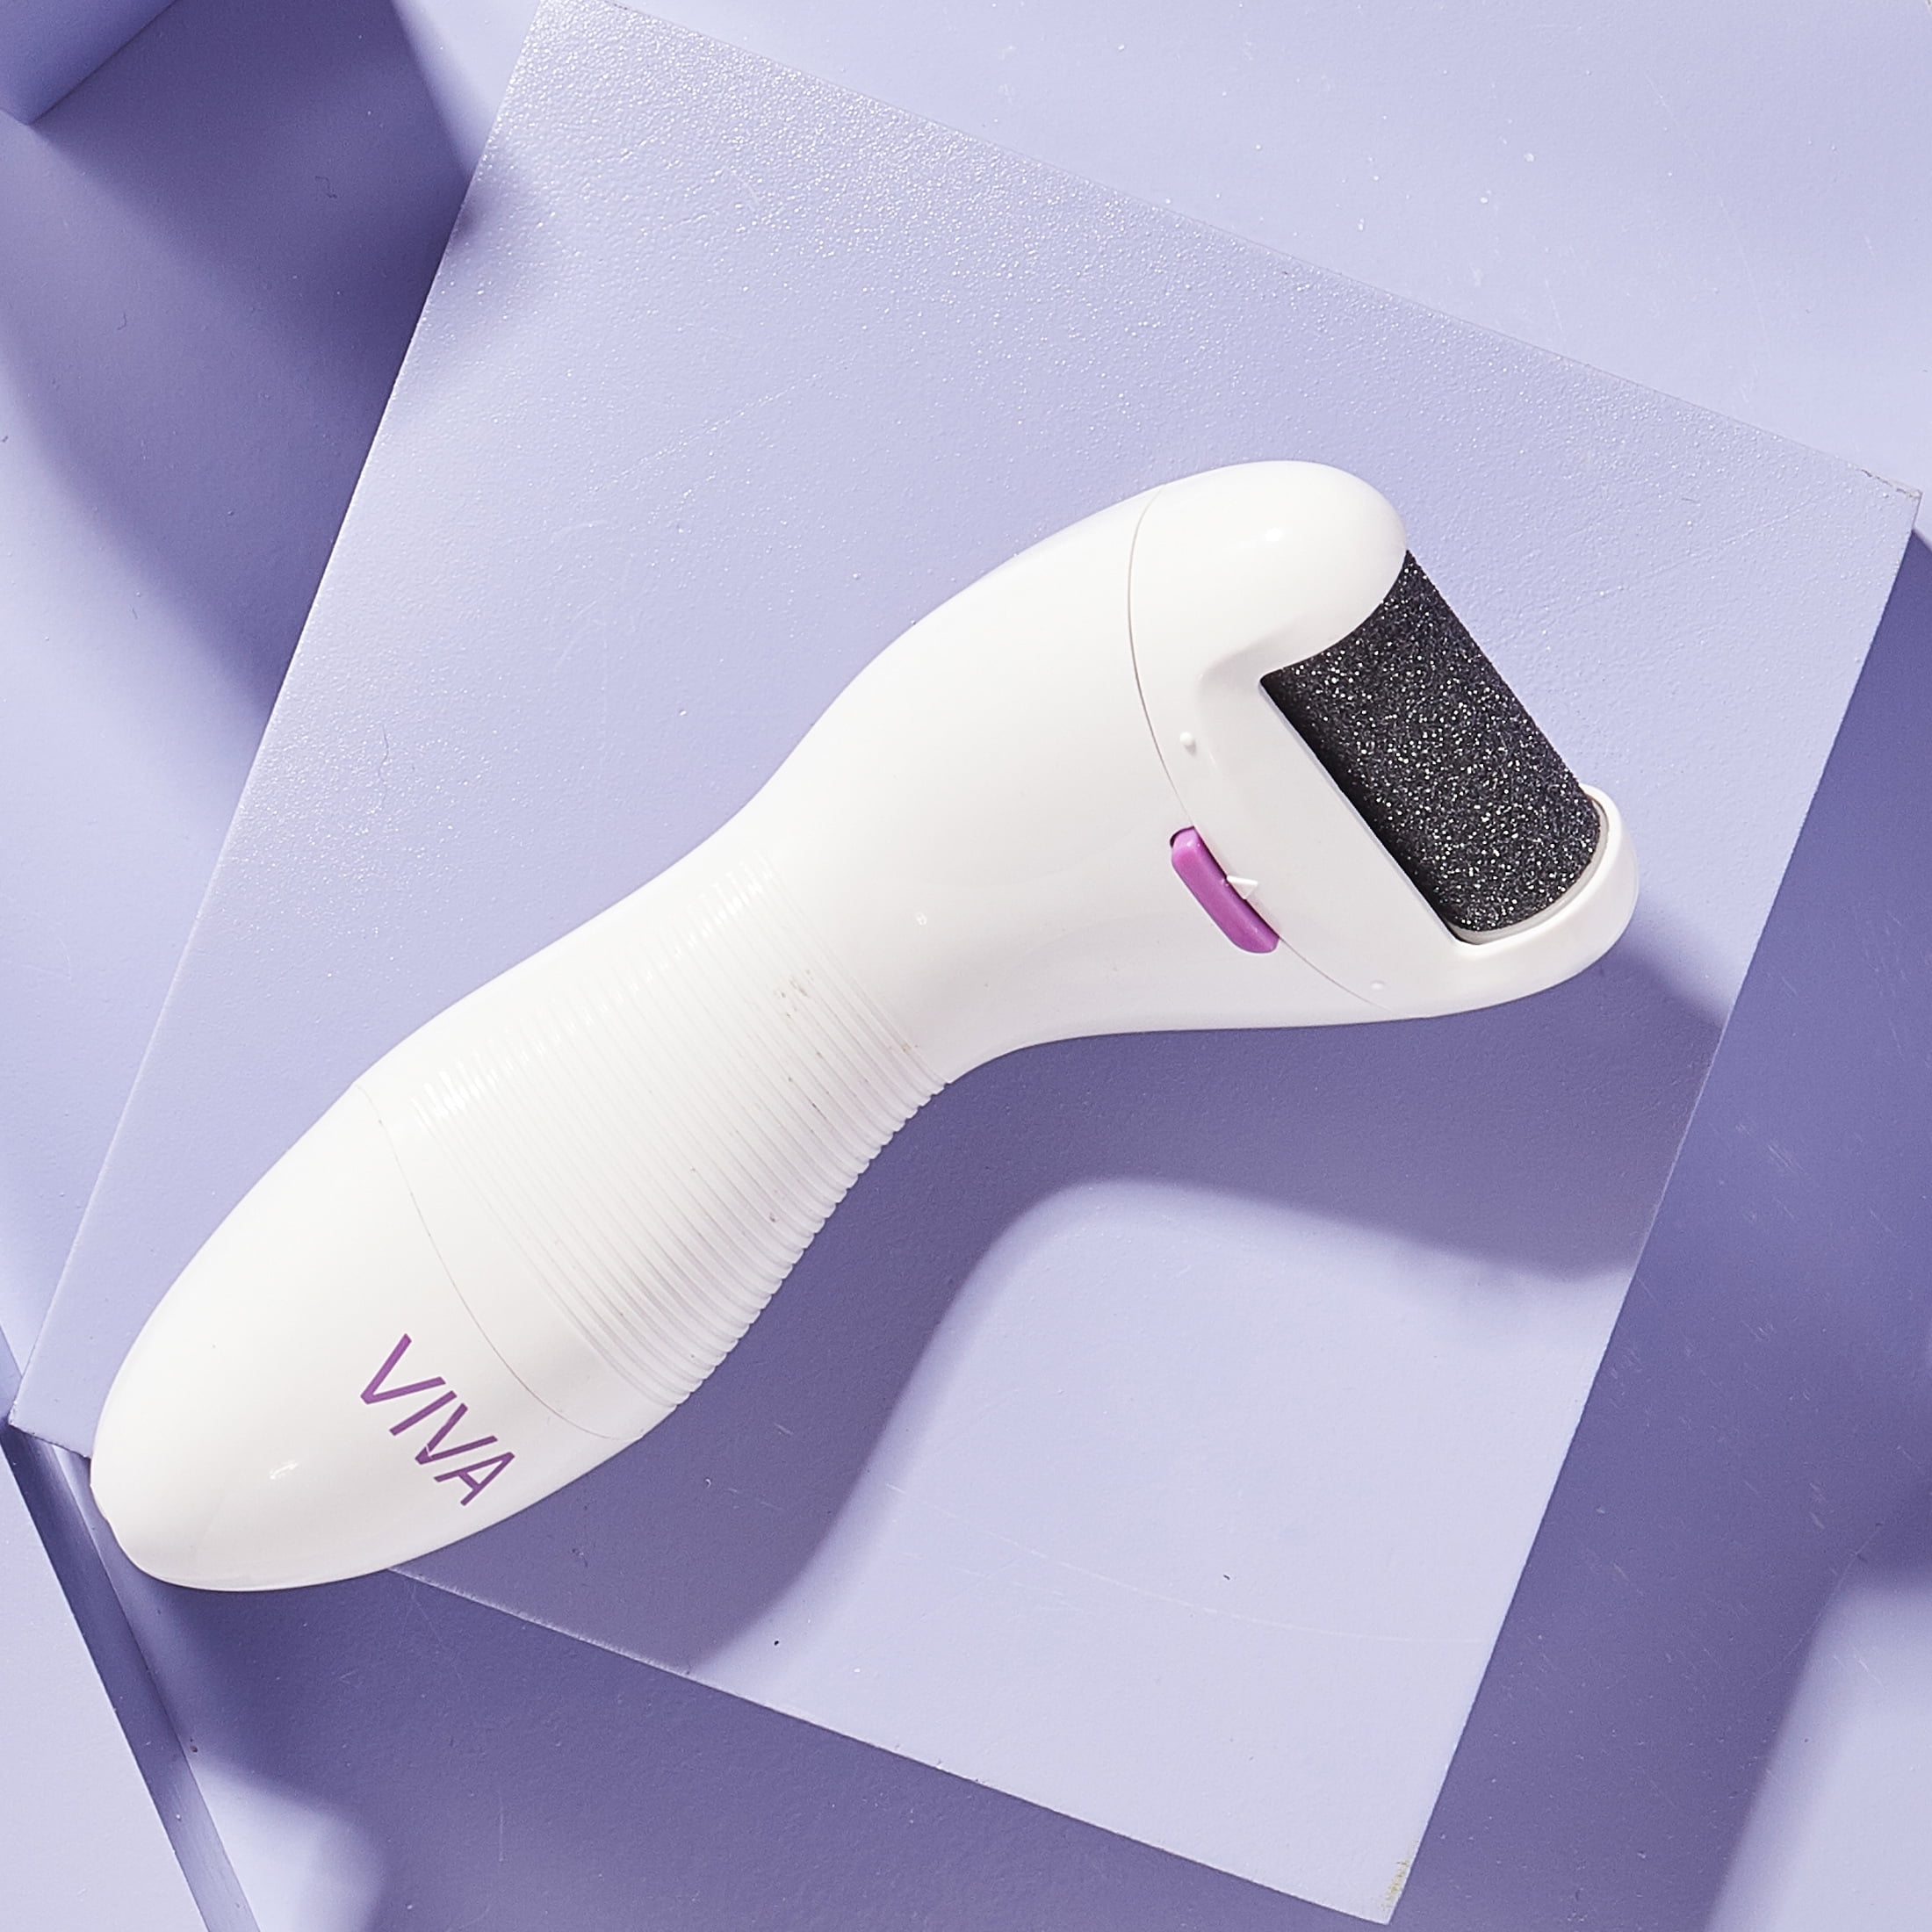 Smooth Pedicure Wand – Nuve